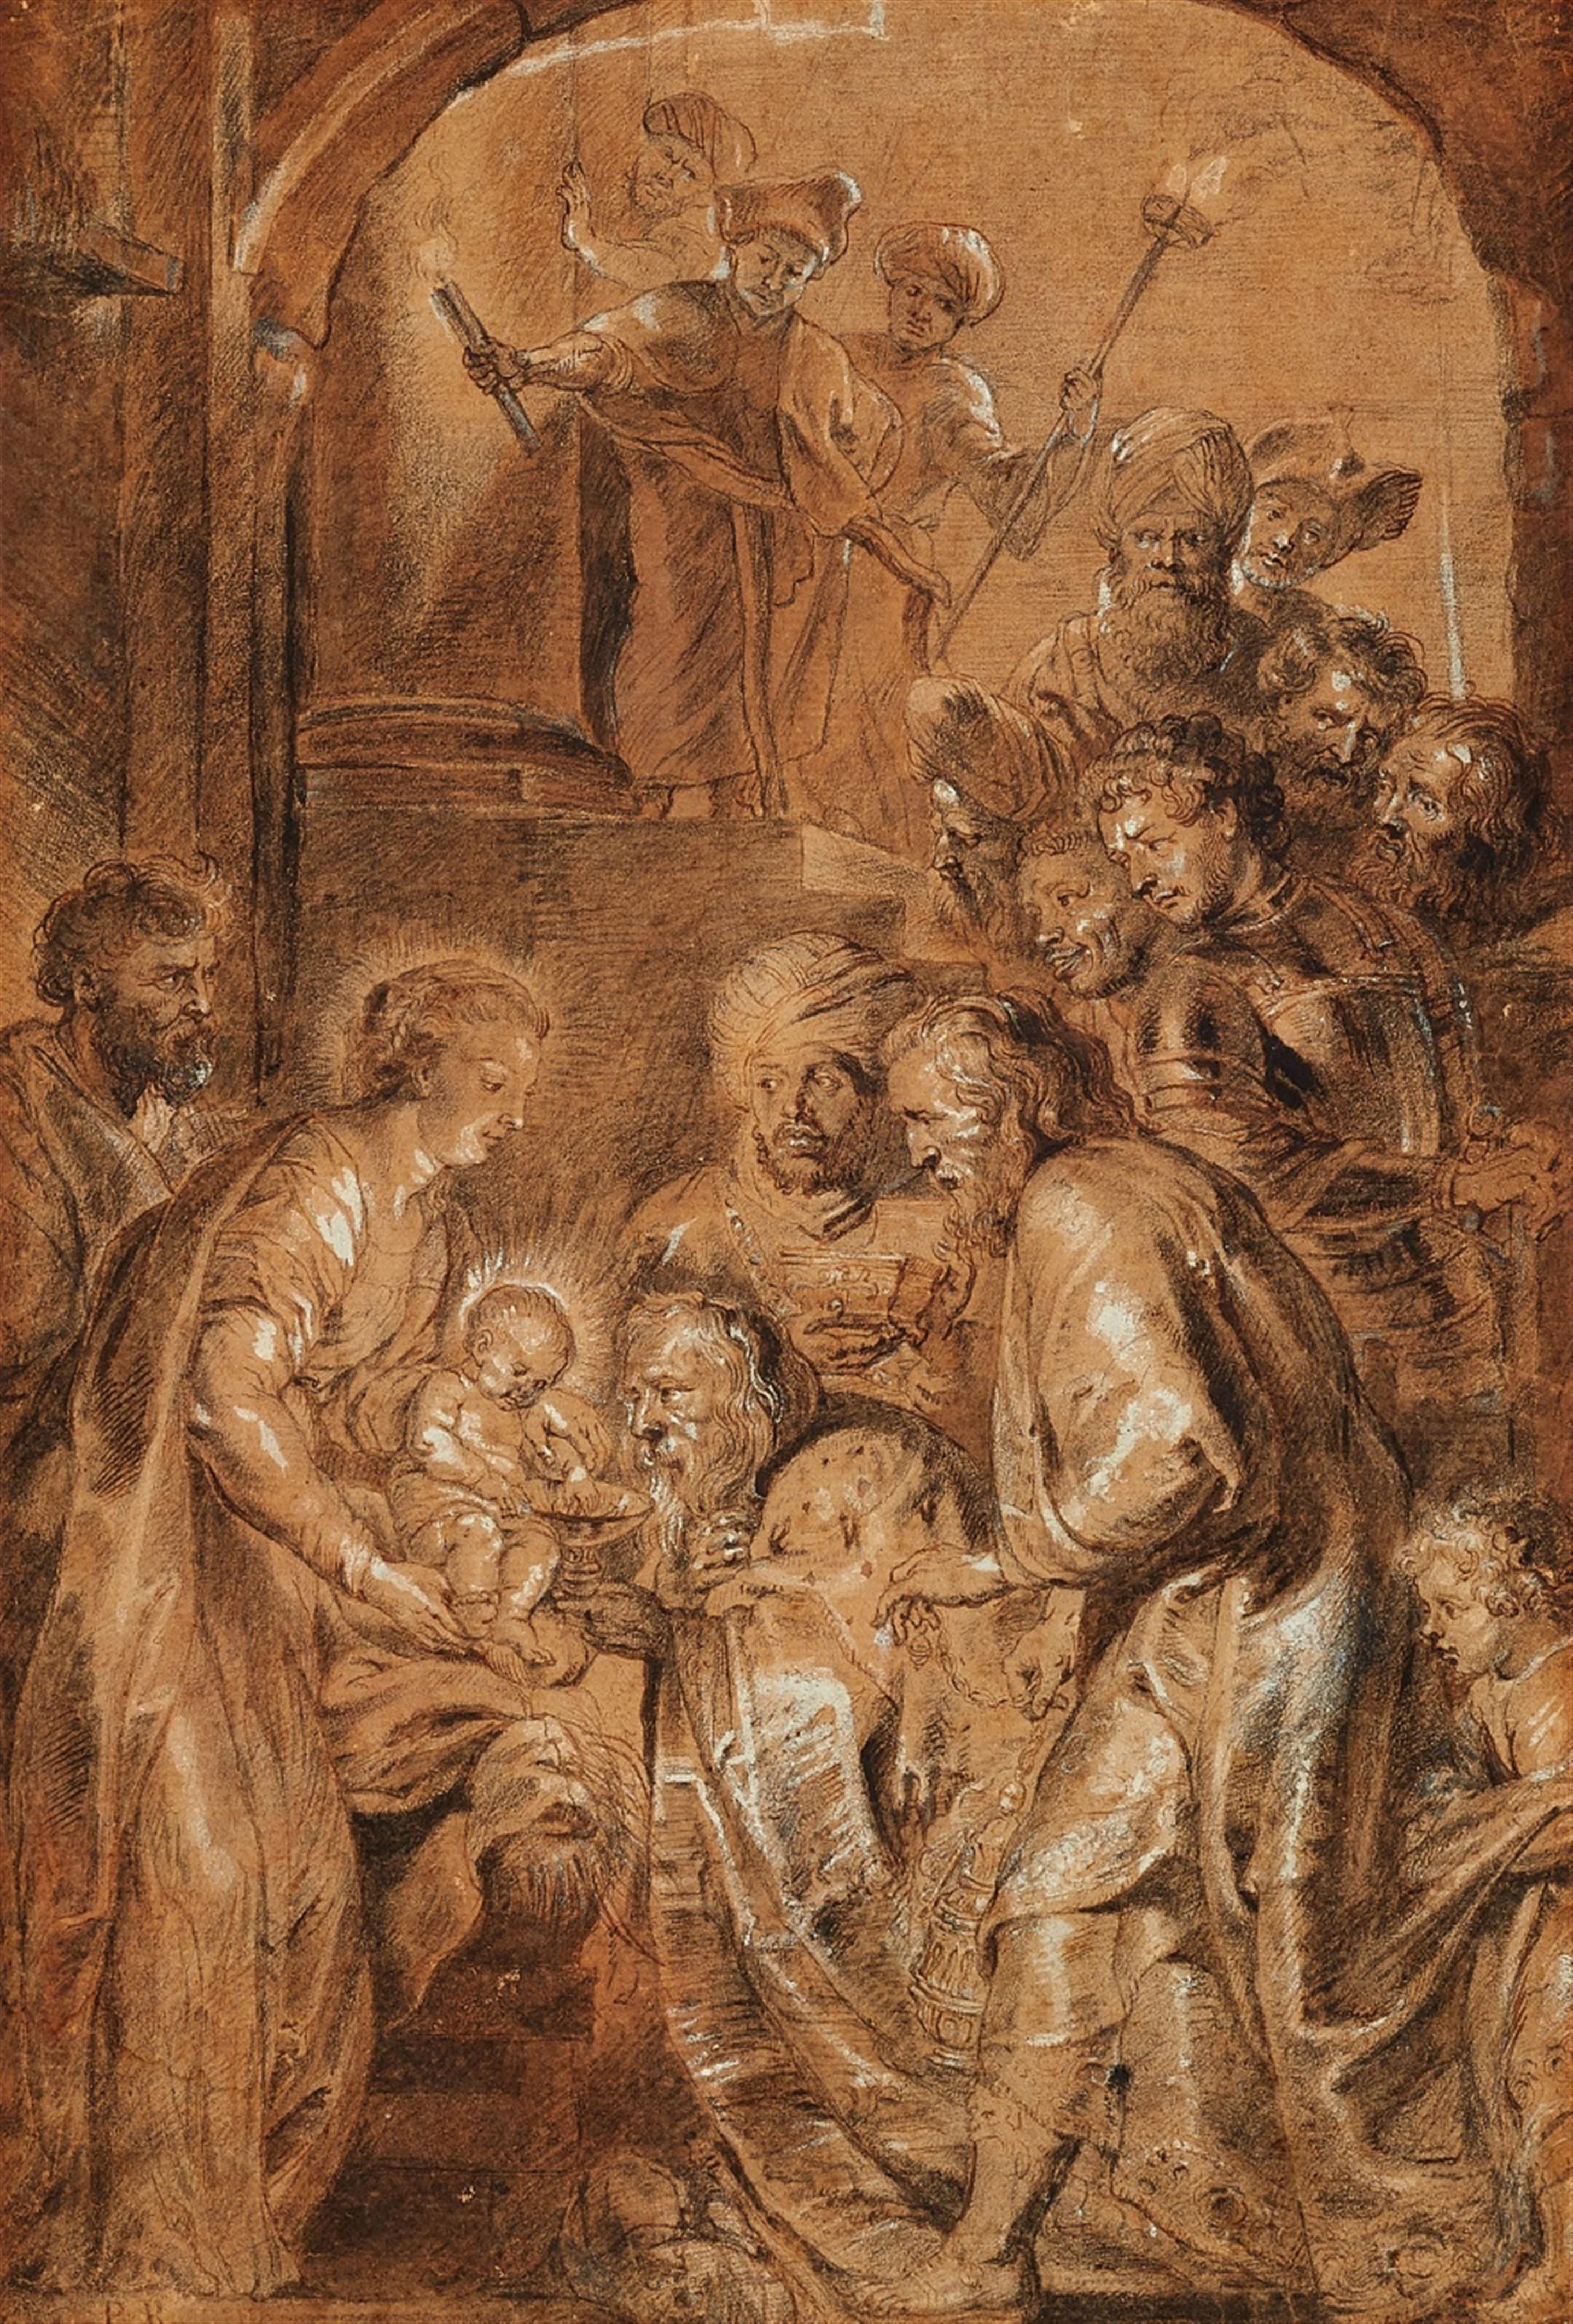 Lucas Vorsterman, attributed to - The Adoration of the Magi - image-1